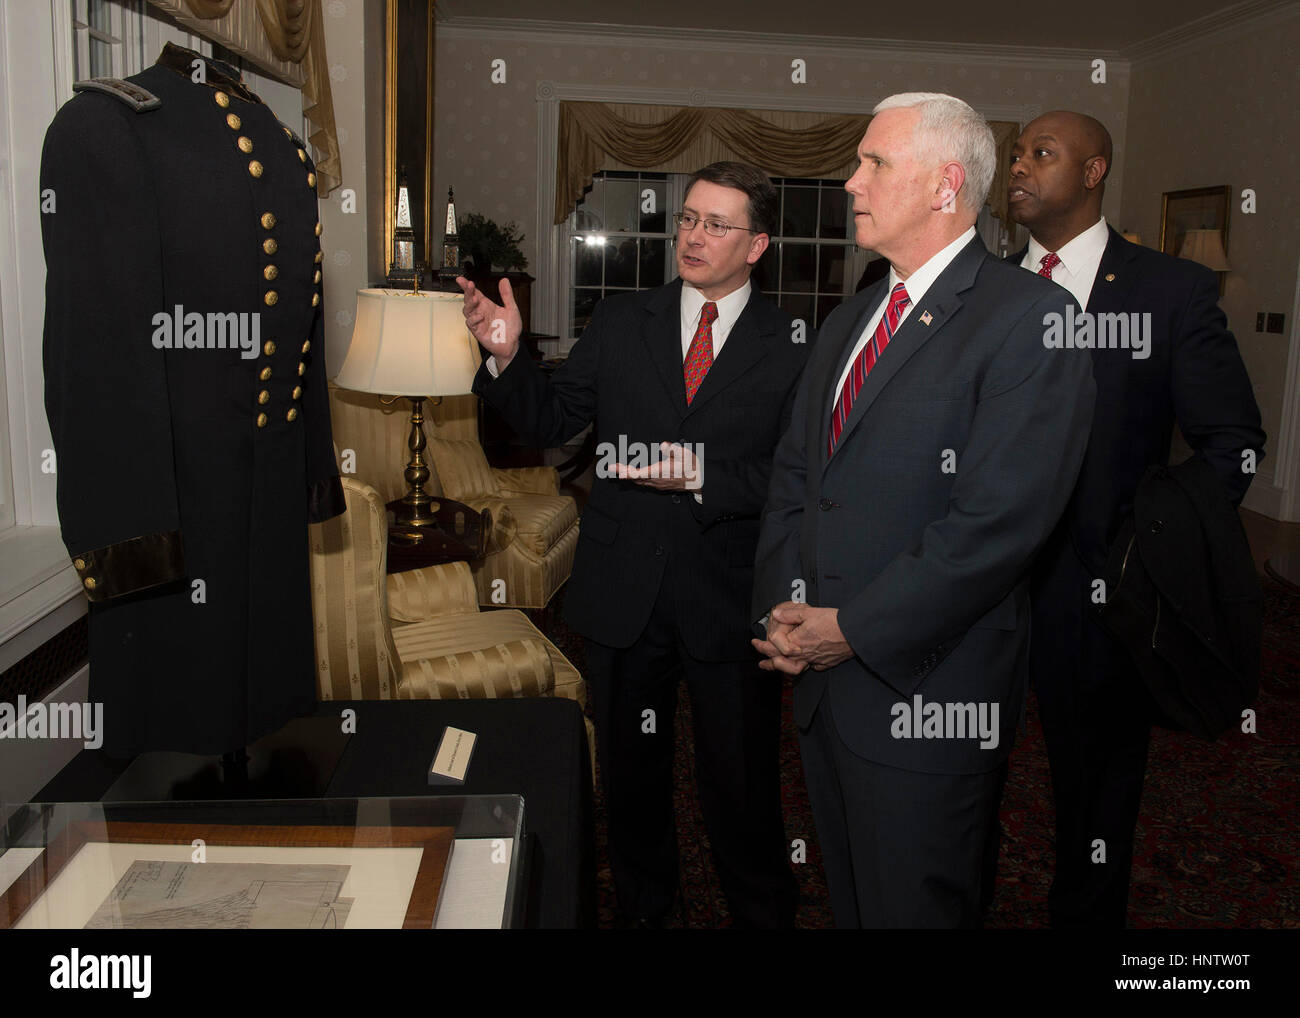 U.S. Vice President Mike Pence and Senator Tim Scott, right, during a visit to the U.S. Military Academy to attend the Flipper Dinner February 9, 2017 in West Point, New York.  The annual dinner is held to commemorate the life of Henry O. Flipper, the first African-American graduate of West Point.   (John Pellino/DOD Photo via Planetpix) Stock Photo